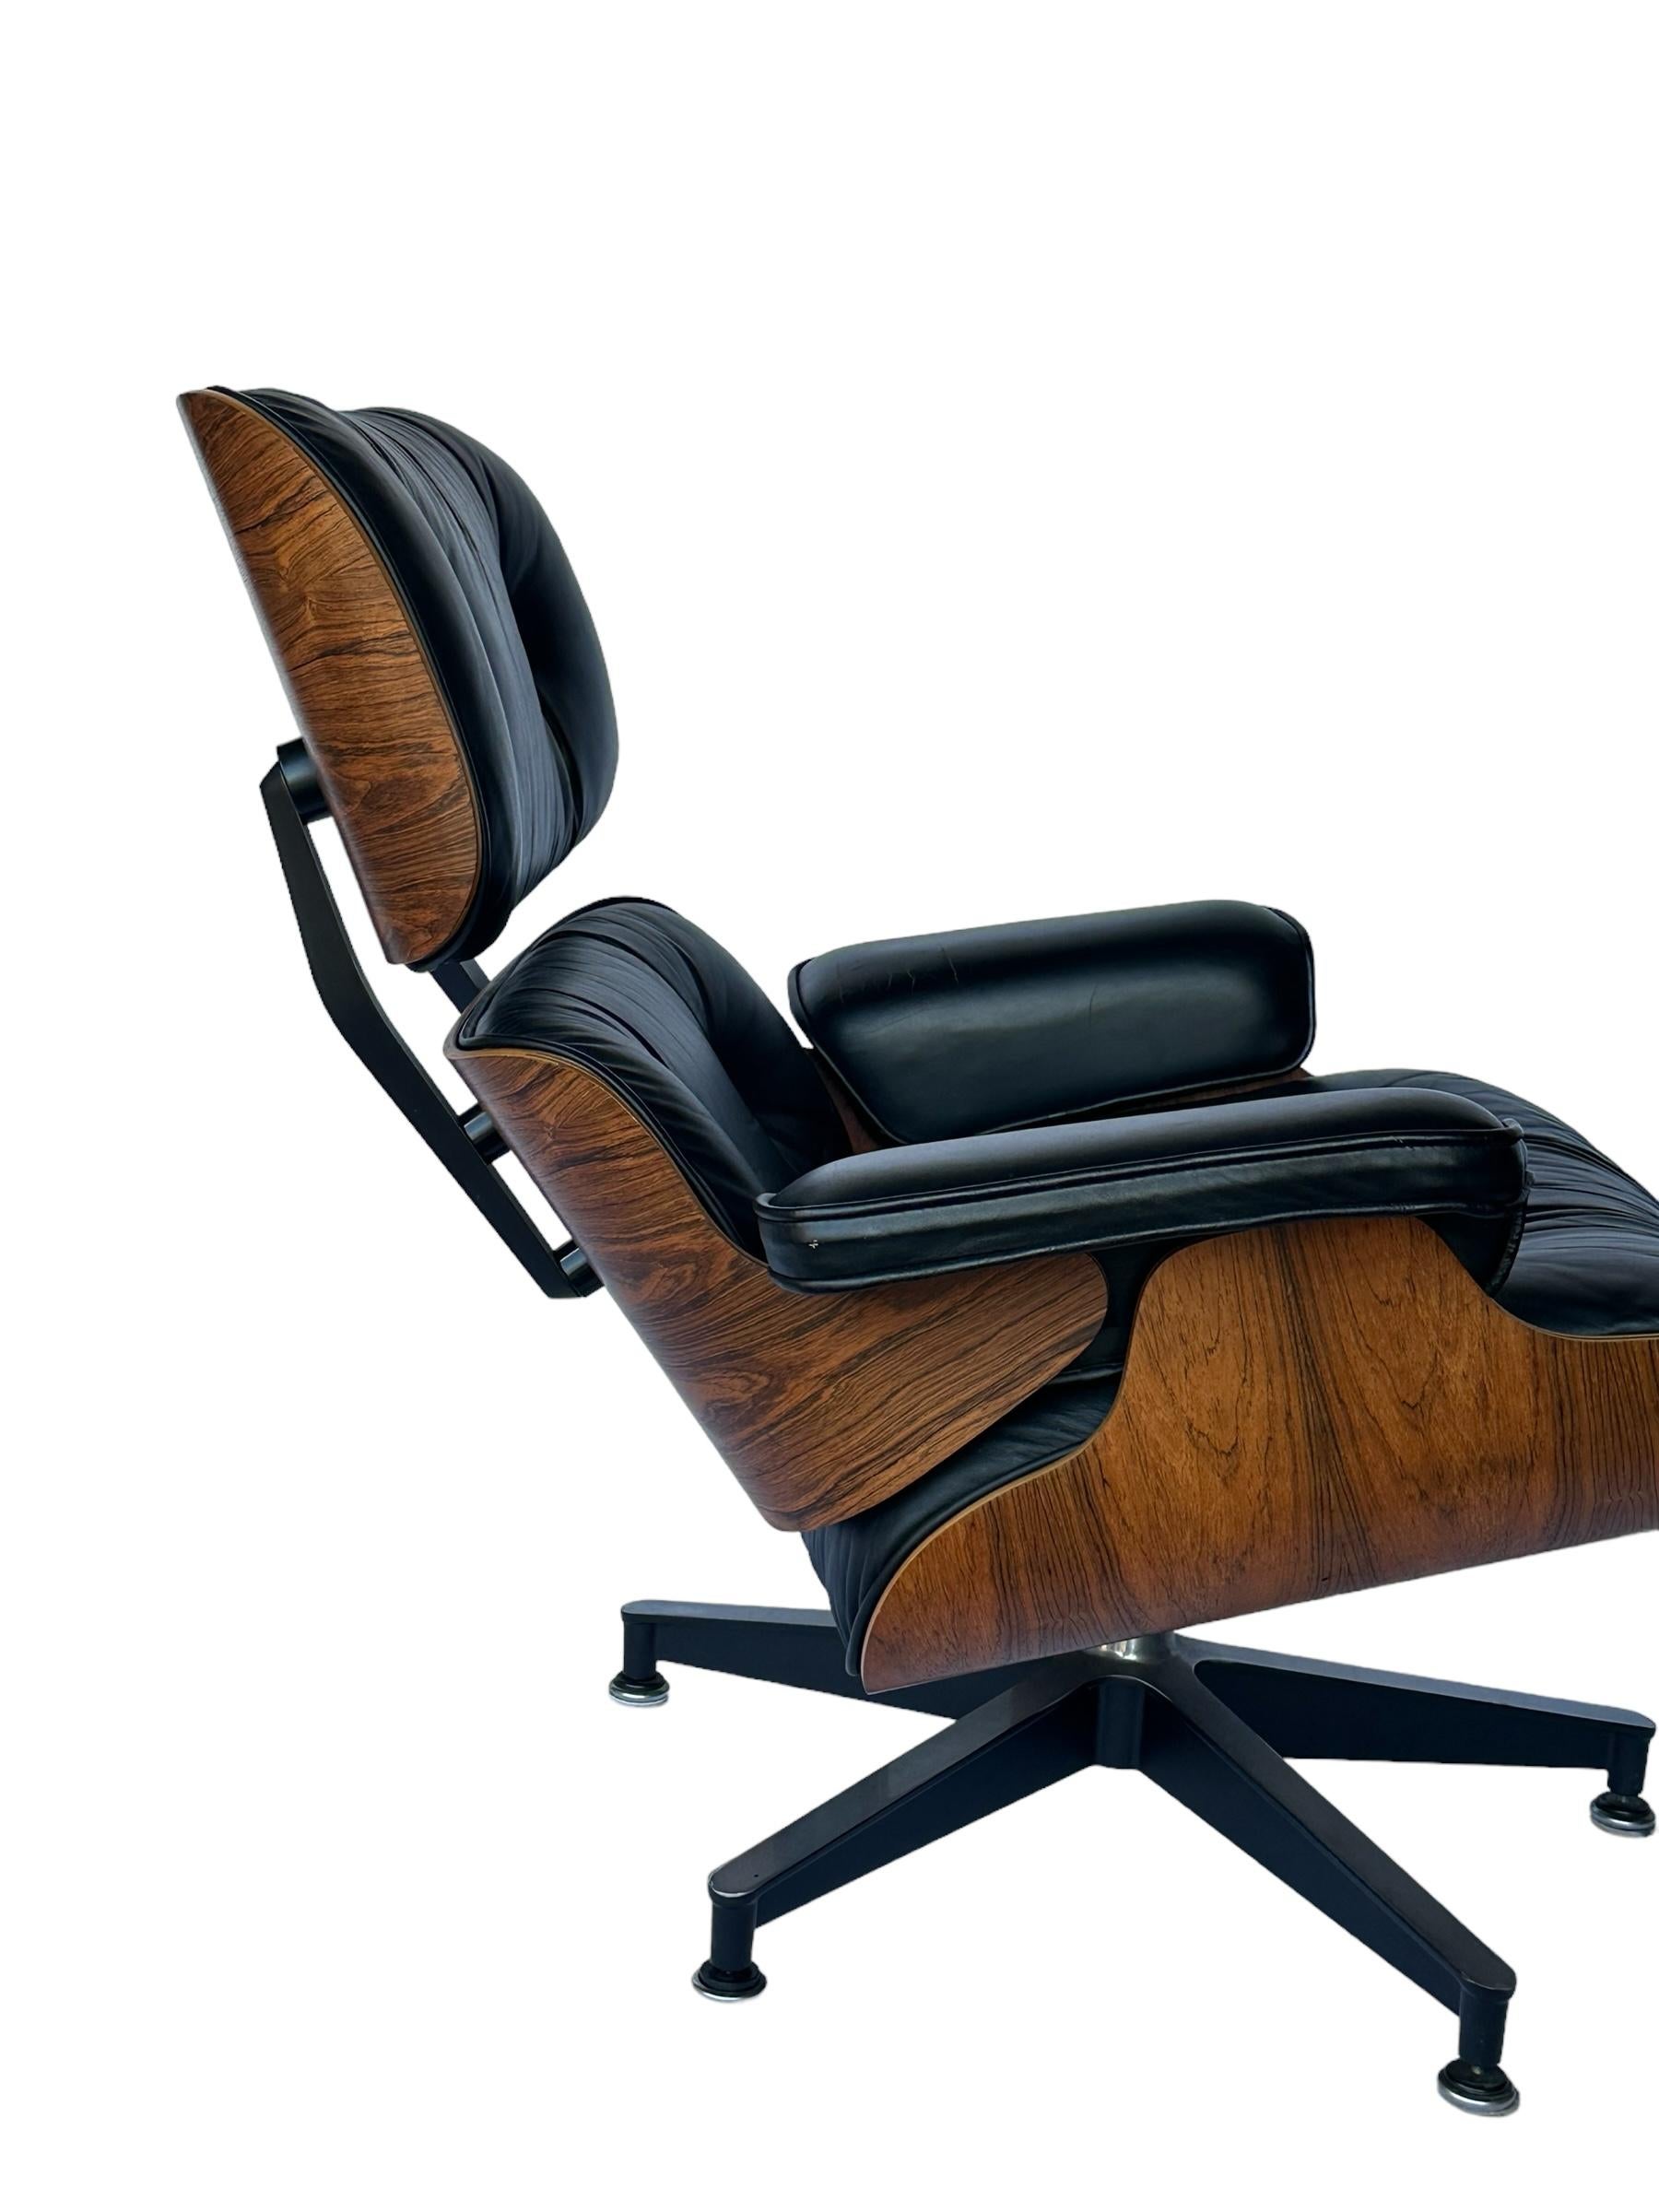 Gorgeous restored original Herman Miller edition Eames lounge chair and ottoman. Executed in Brazilian rosewood with black leather and cast aluminum bases and brackets. Signed and guaranteed authentic. Amazing wood grain patter and coloring.